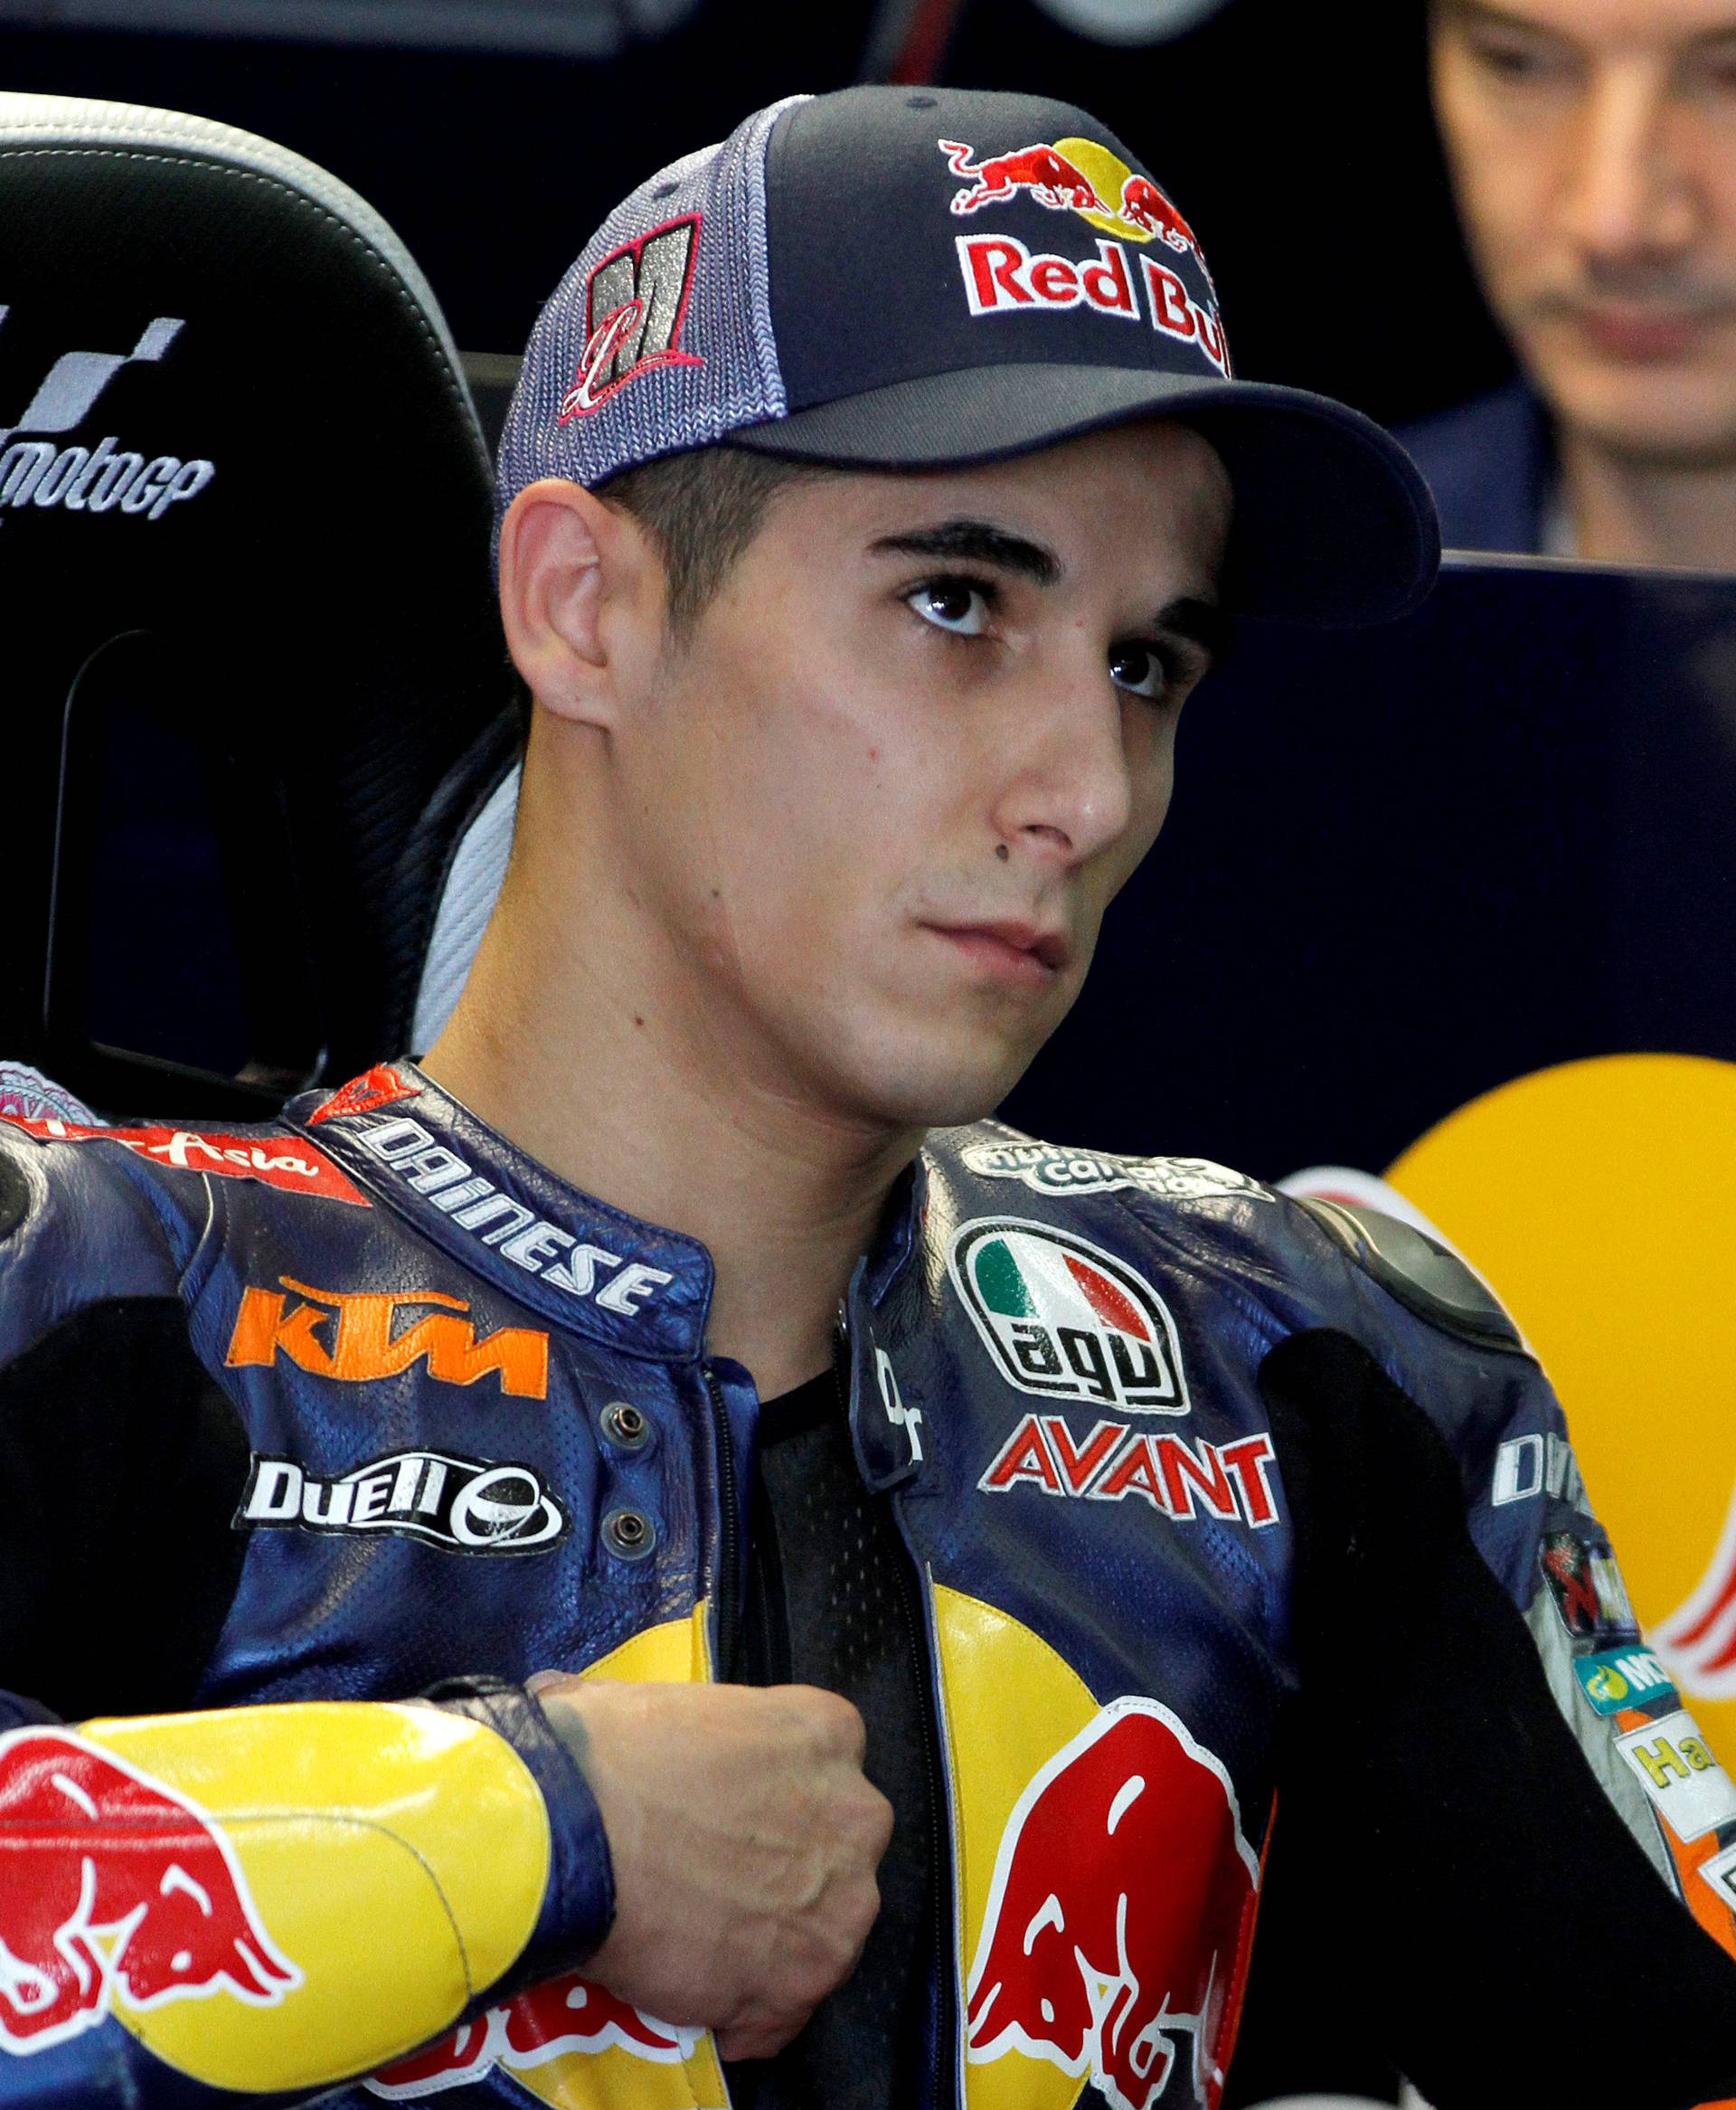 KTM Moto3 rider Luis Salom of Spain looks on before the first free practice session ahead the Valencia Motorcycle Grand Prix at the Ricardo Tormo racetrack in Cheste, near Valencia